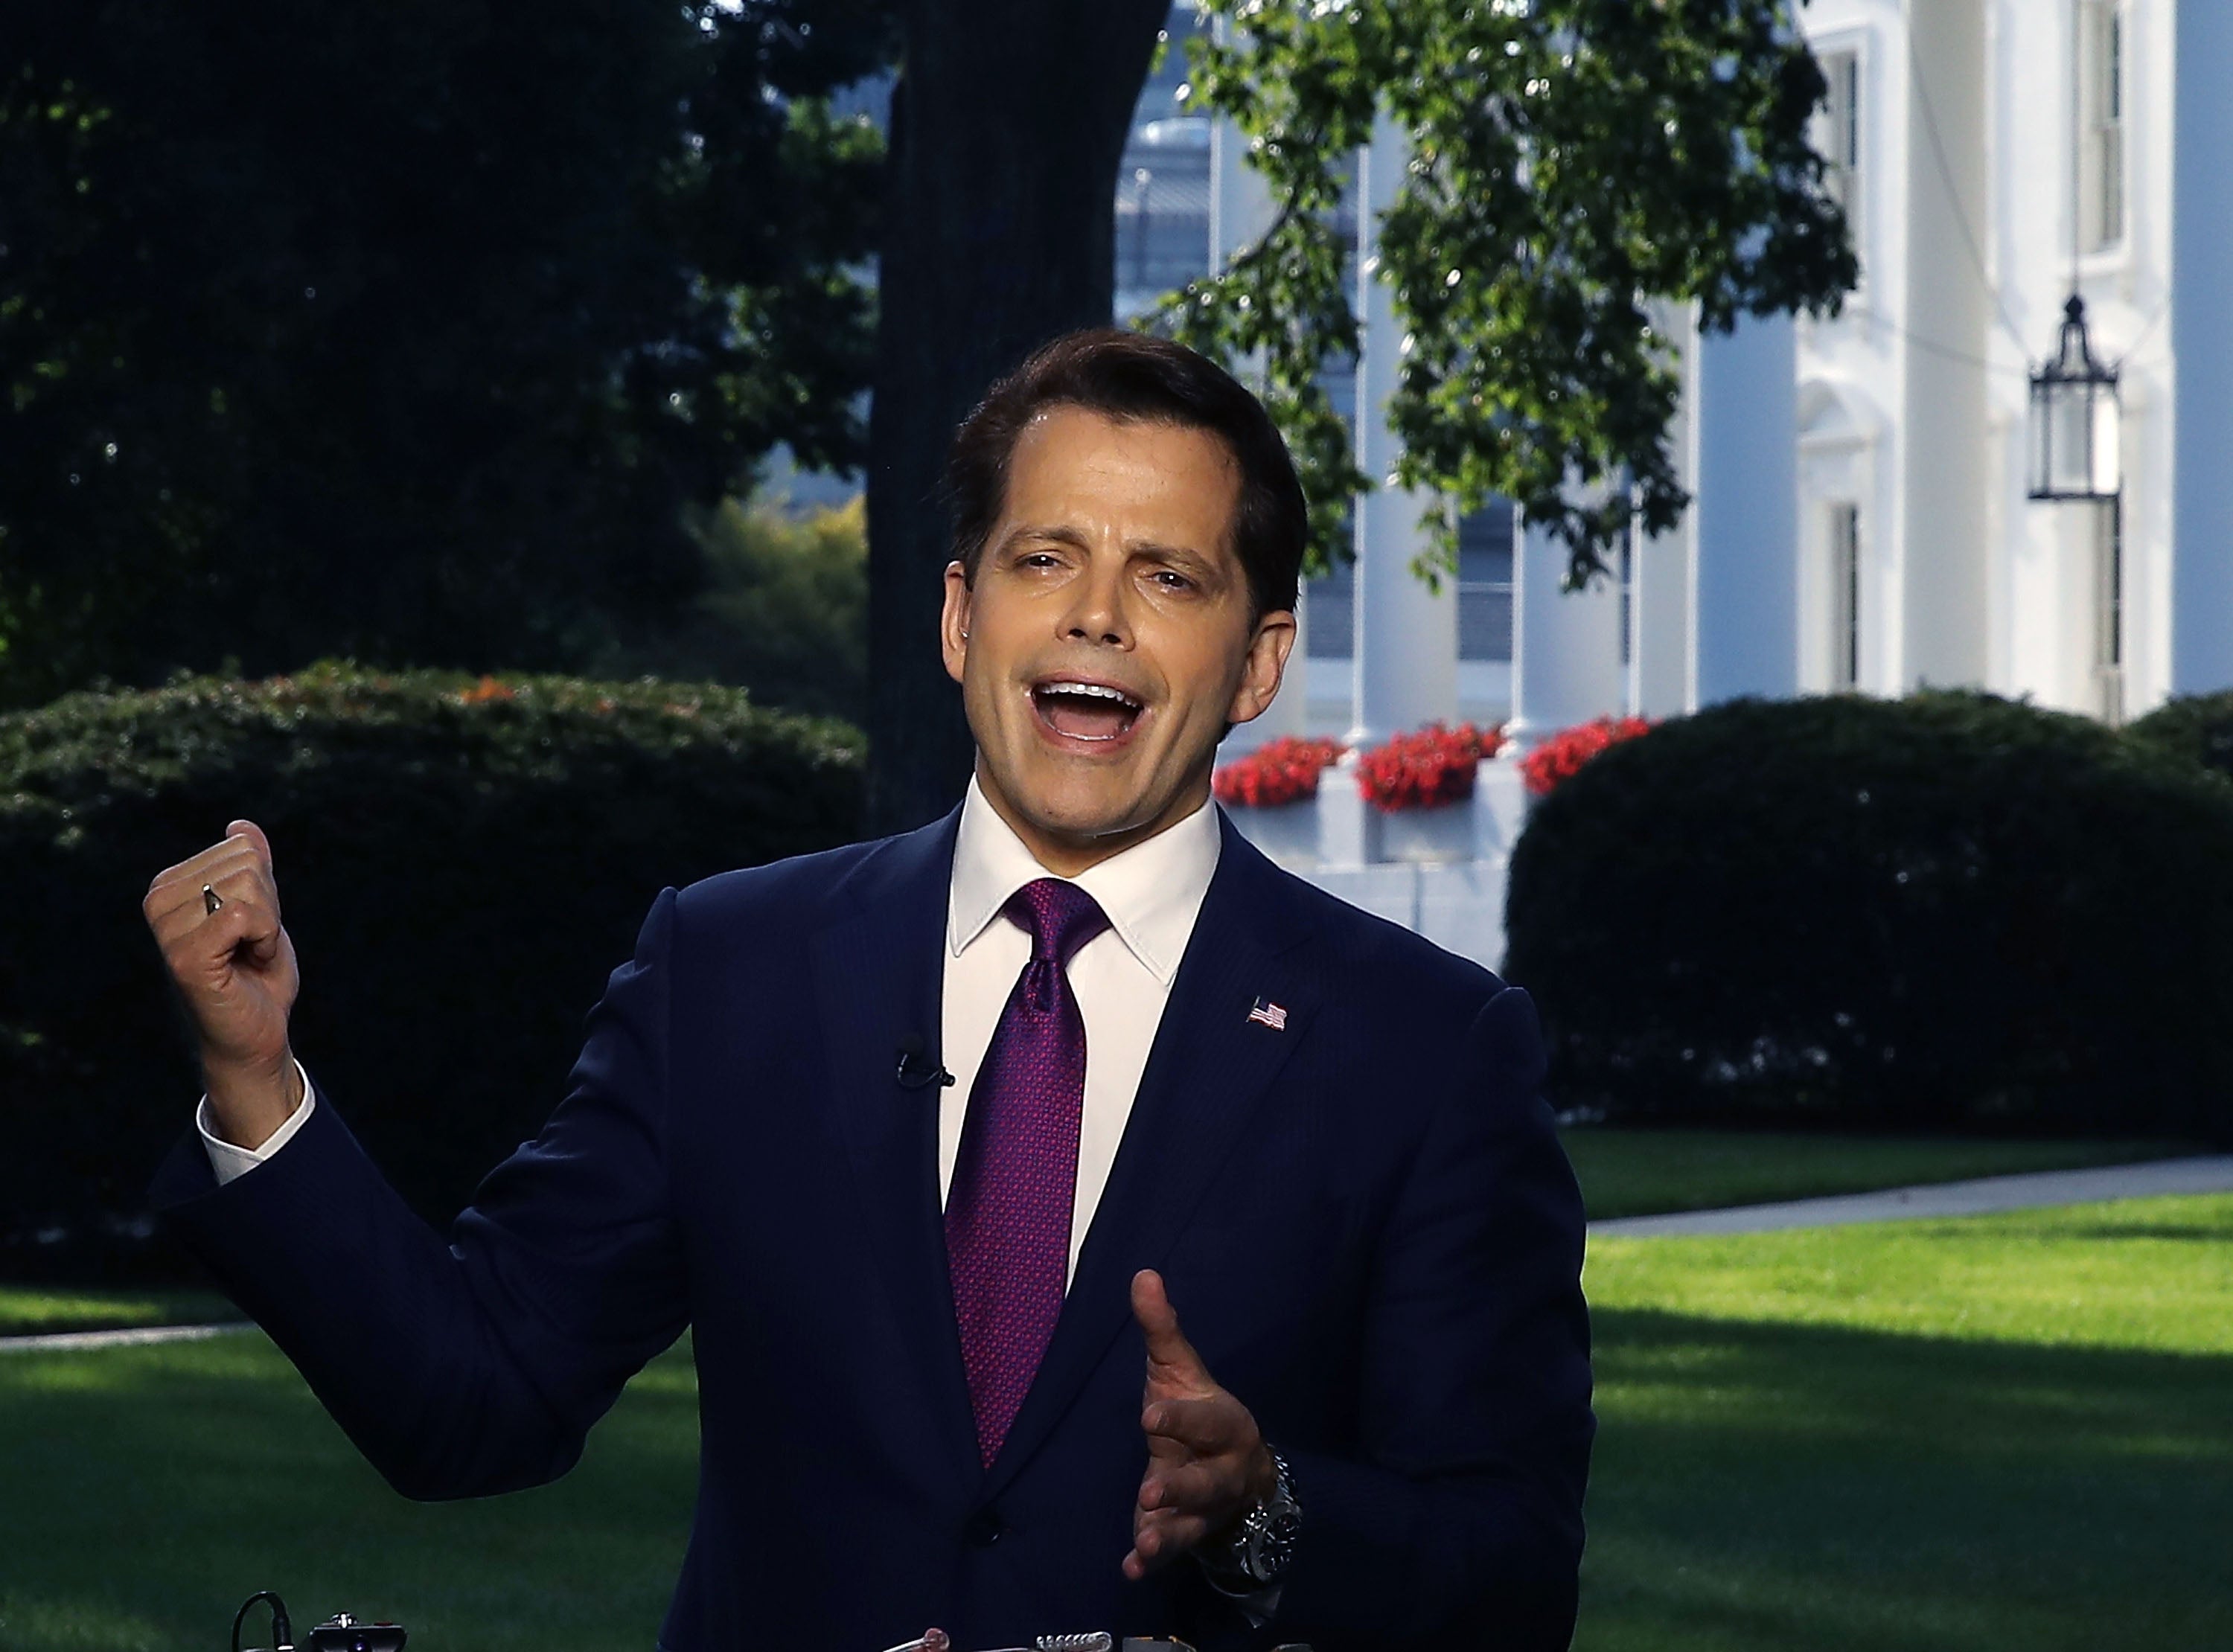 Anthony Scaramucci Is No Longer The White House Communications Director
